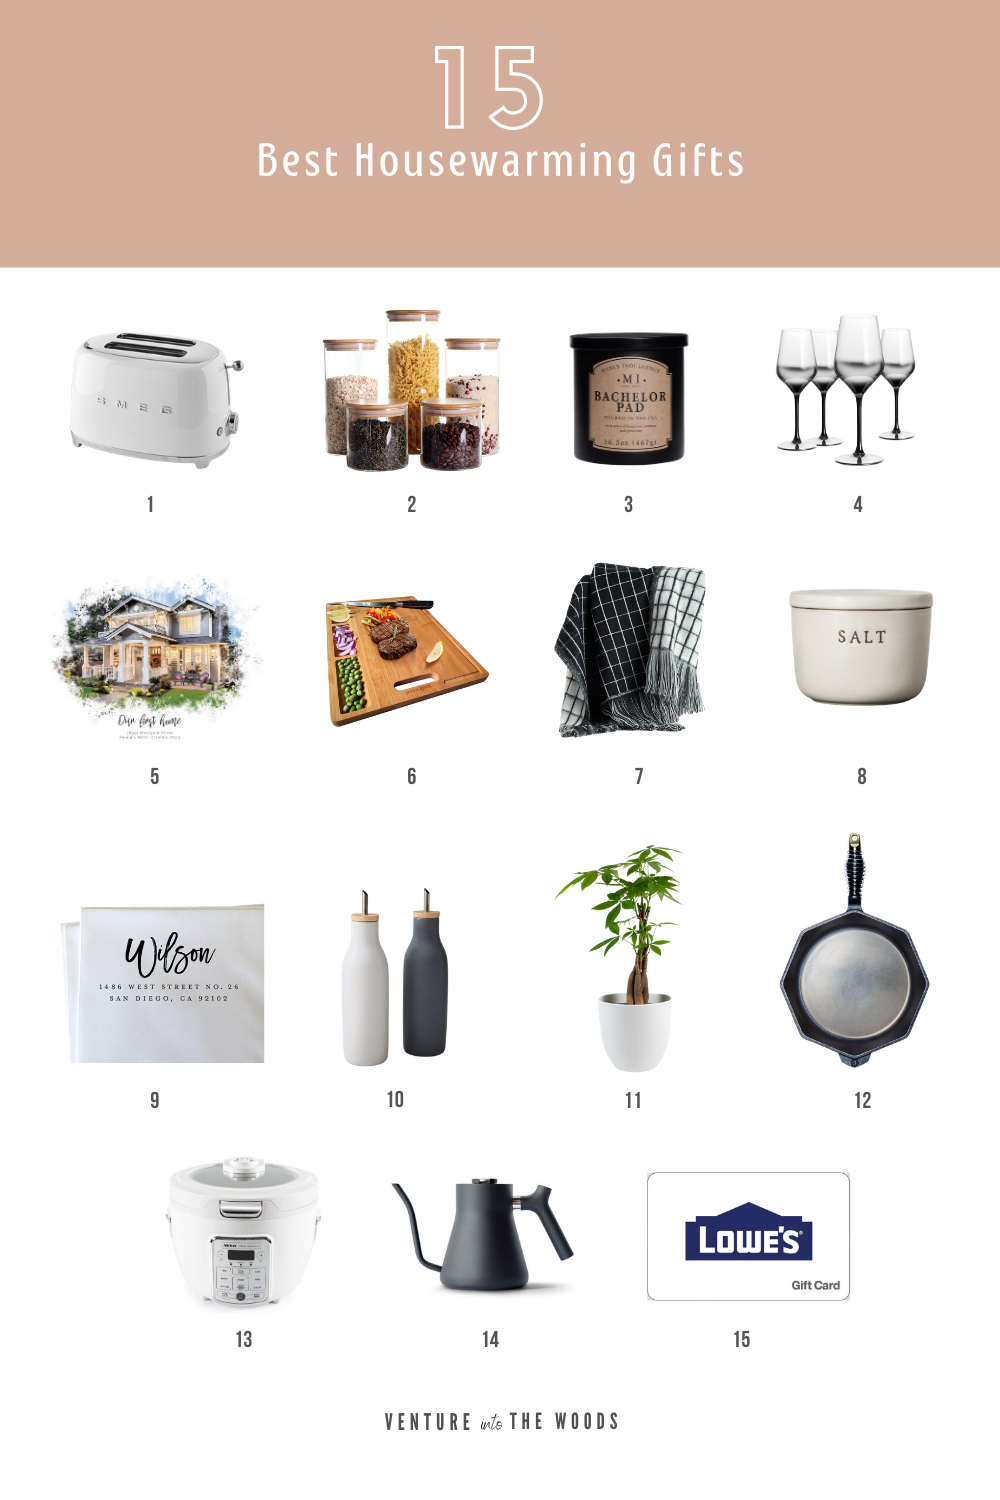 Housewarming gift ideas: 37 of the most thoughtful housewarming